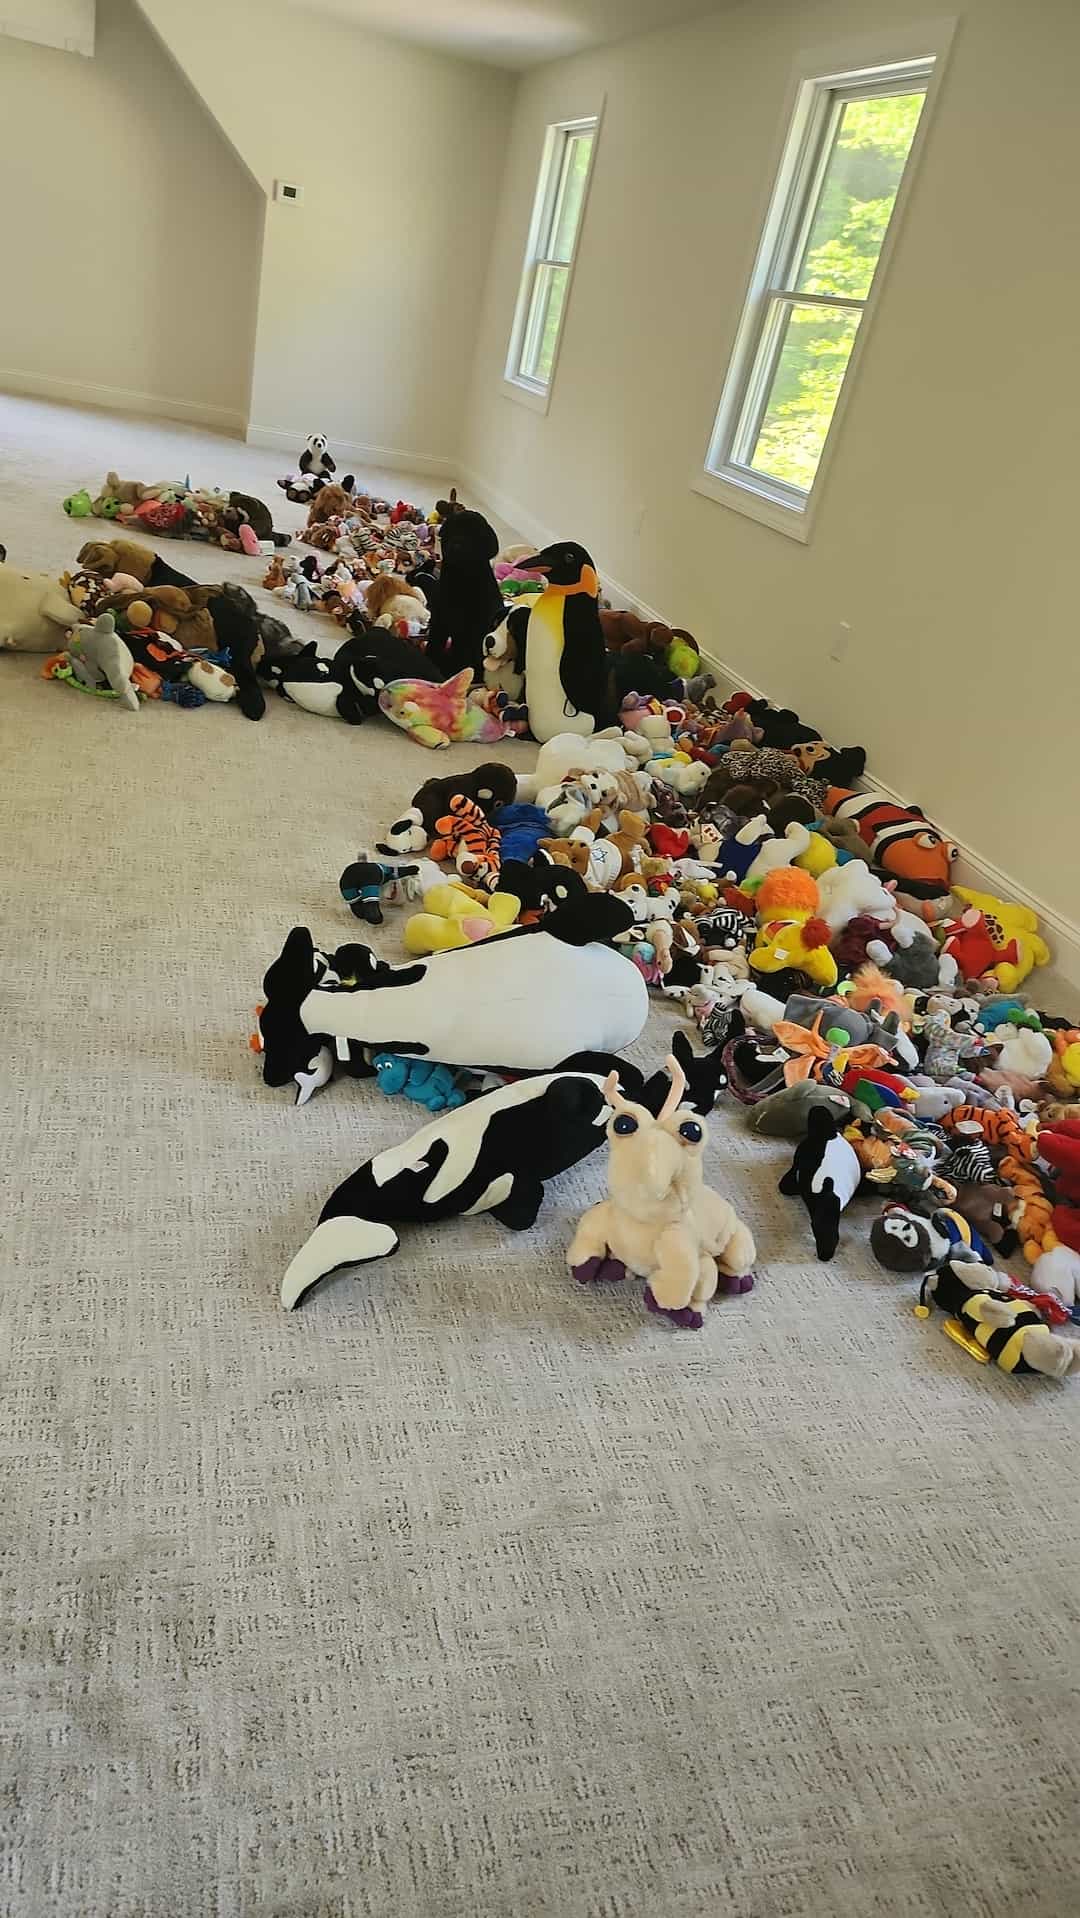 Stuffies are taking over!!!